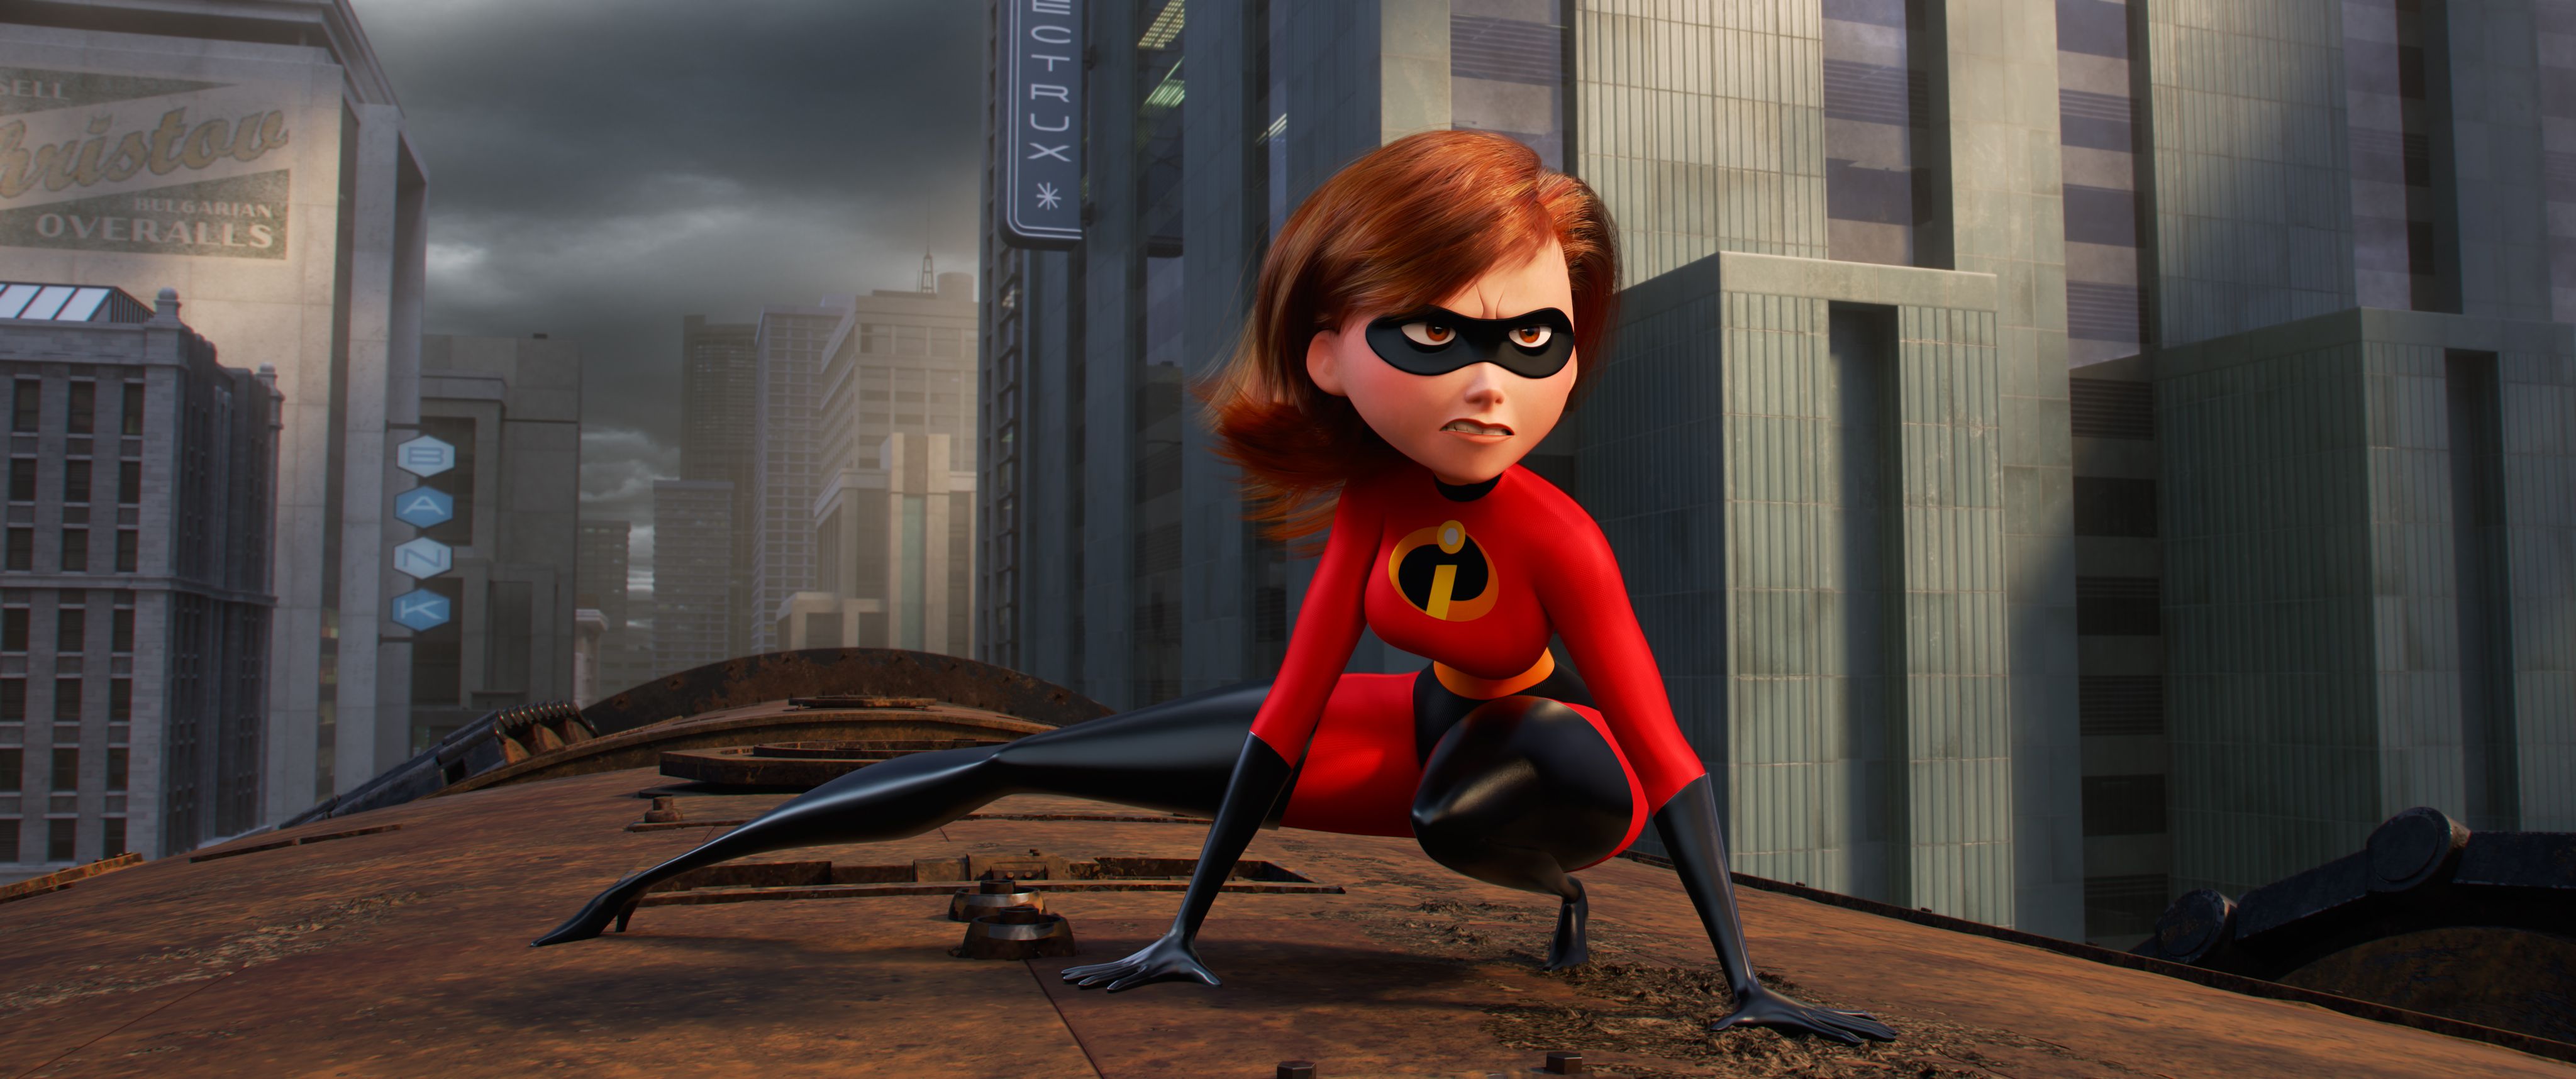 4096x1716 Elastigirl In The Incredibles 2 2022 Hd Movies 4k Wallpaper Image Background Photo And Picture